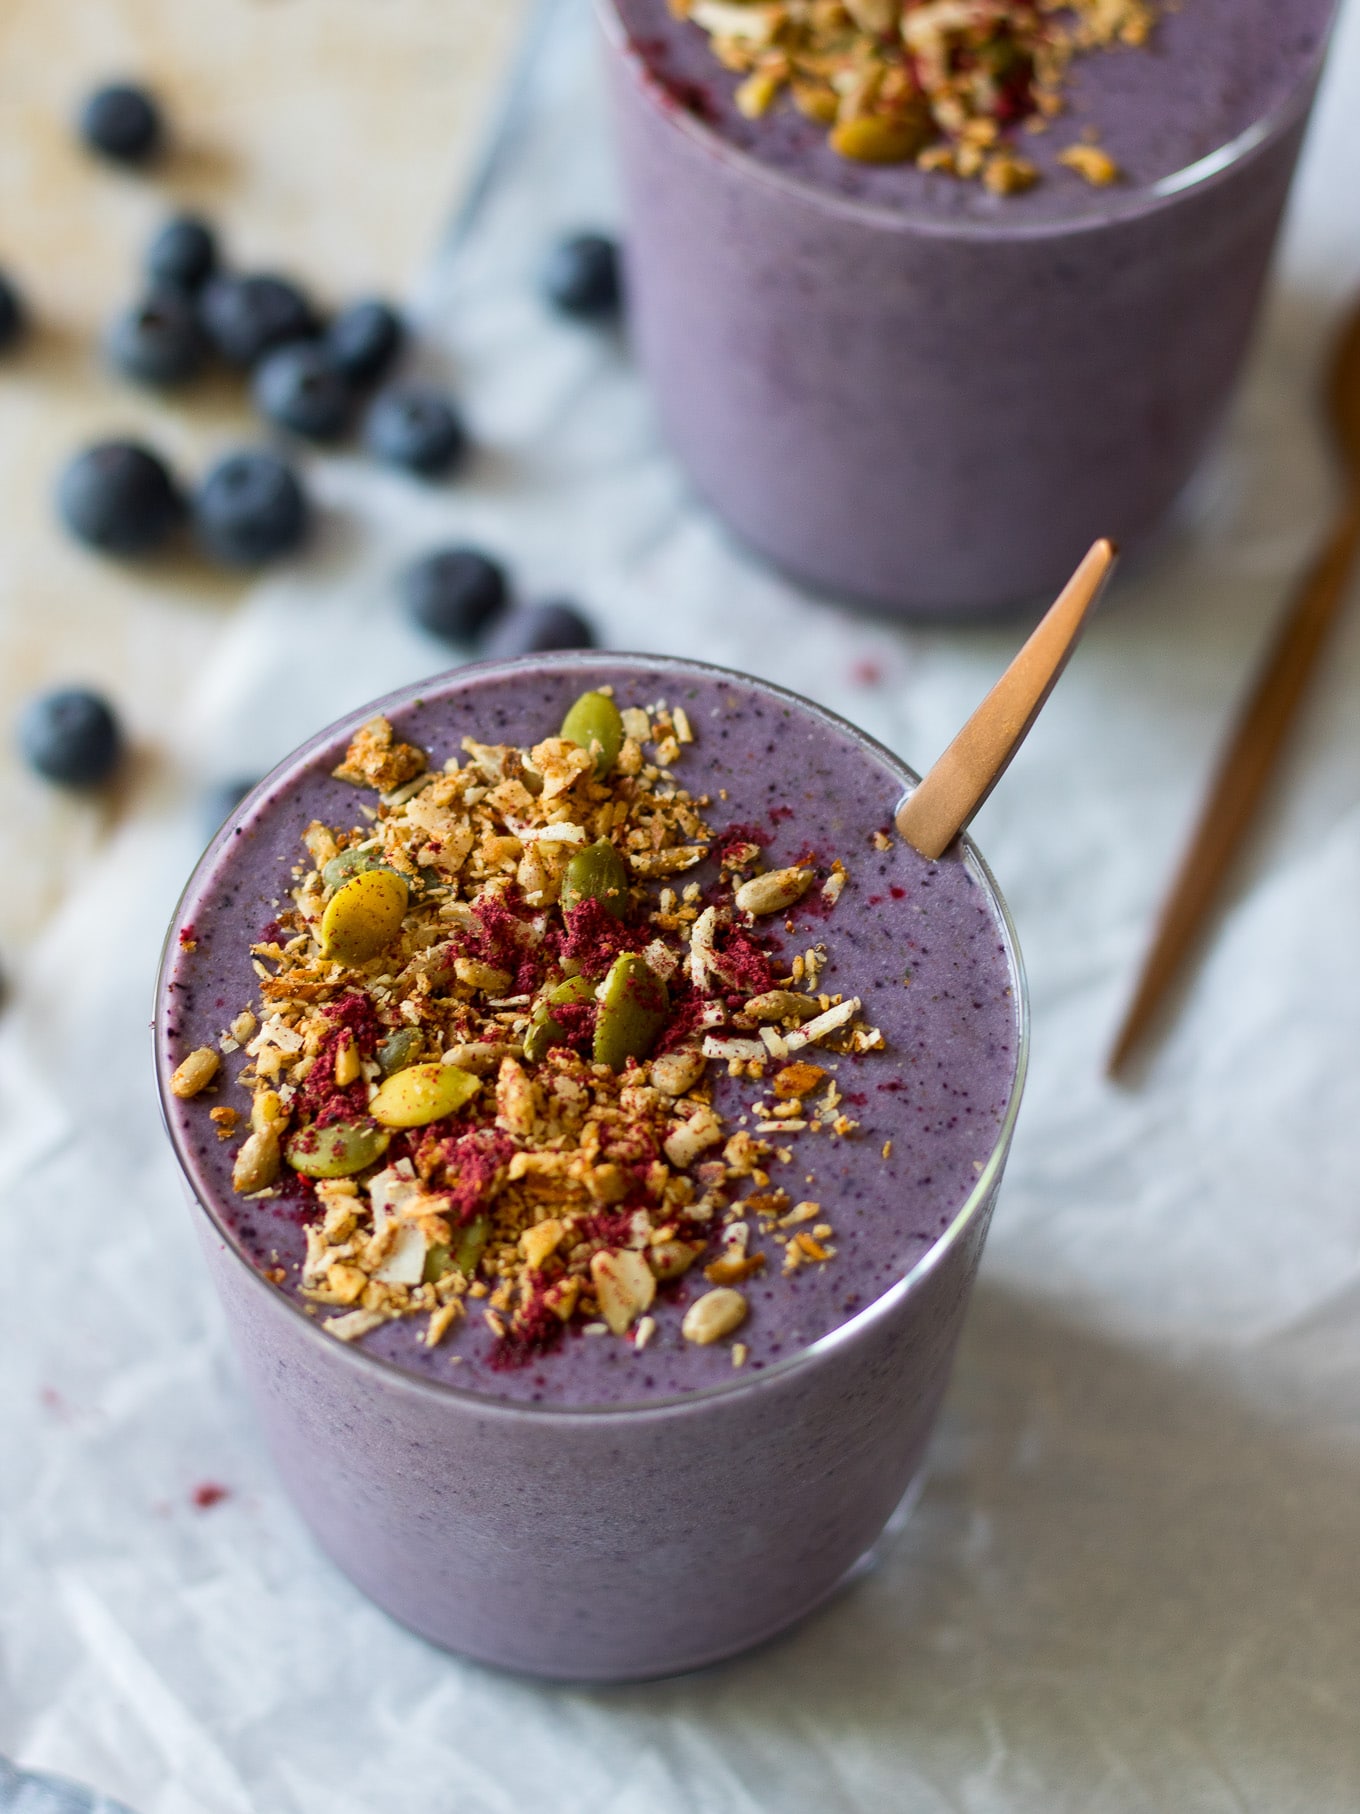 Blueberry Zucchini Protein Smoothie (gluten free, paleo, vegan option) - easy and delicious, this smoothie made with frozen zucchini makes a quick breakfast or post workout healthy snack! #smoothie #postworkout #healthysnacks